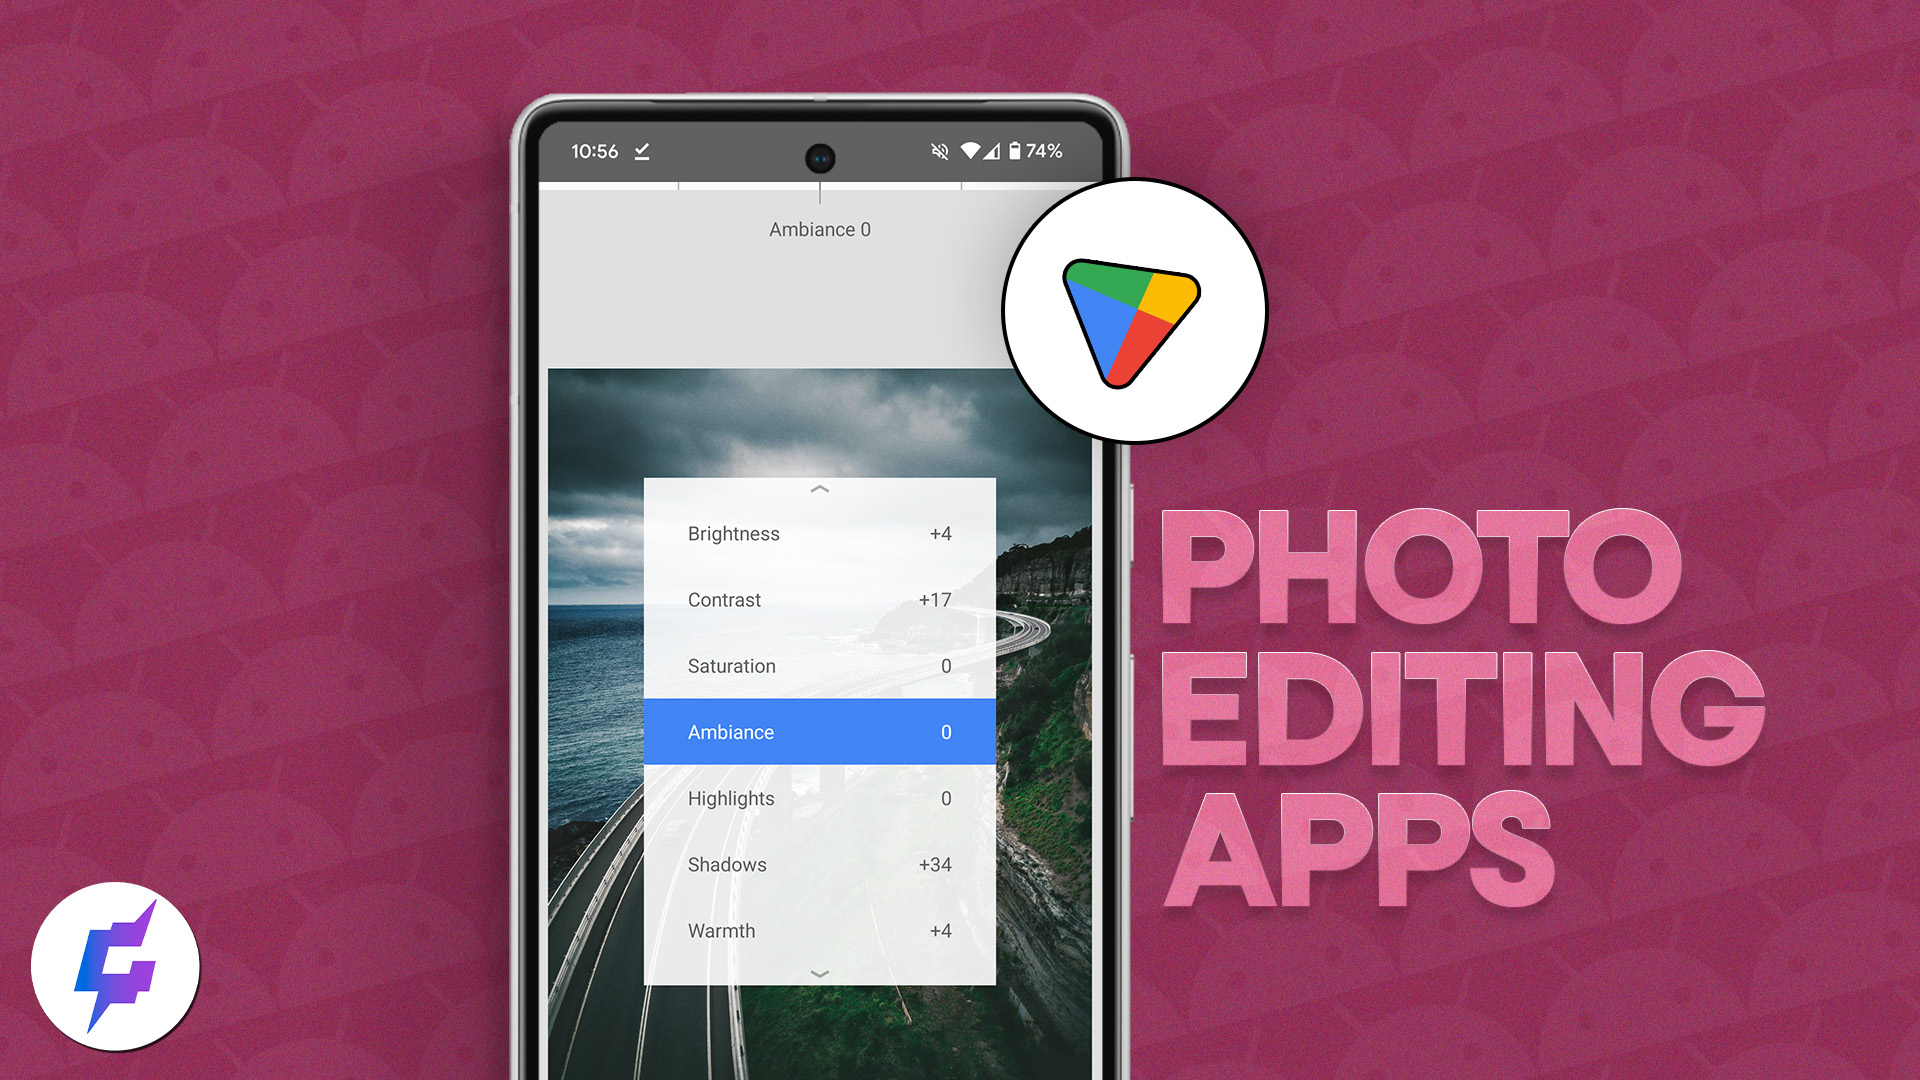 Best photo editing apps for Android